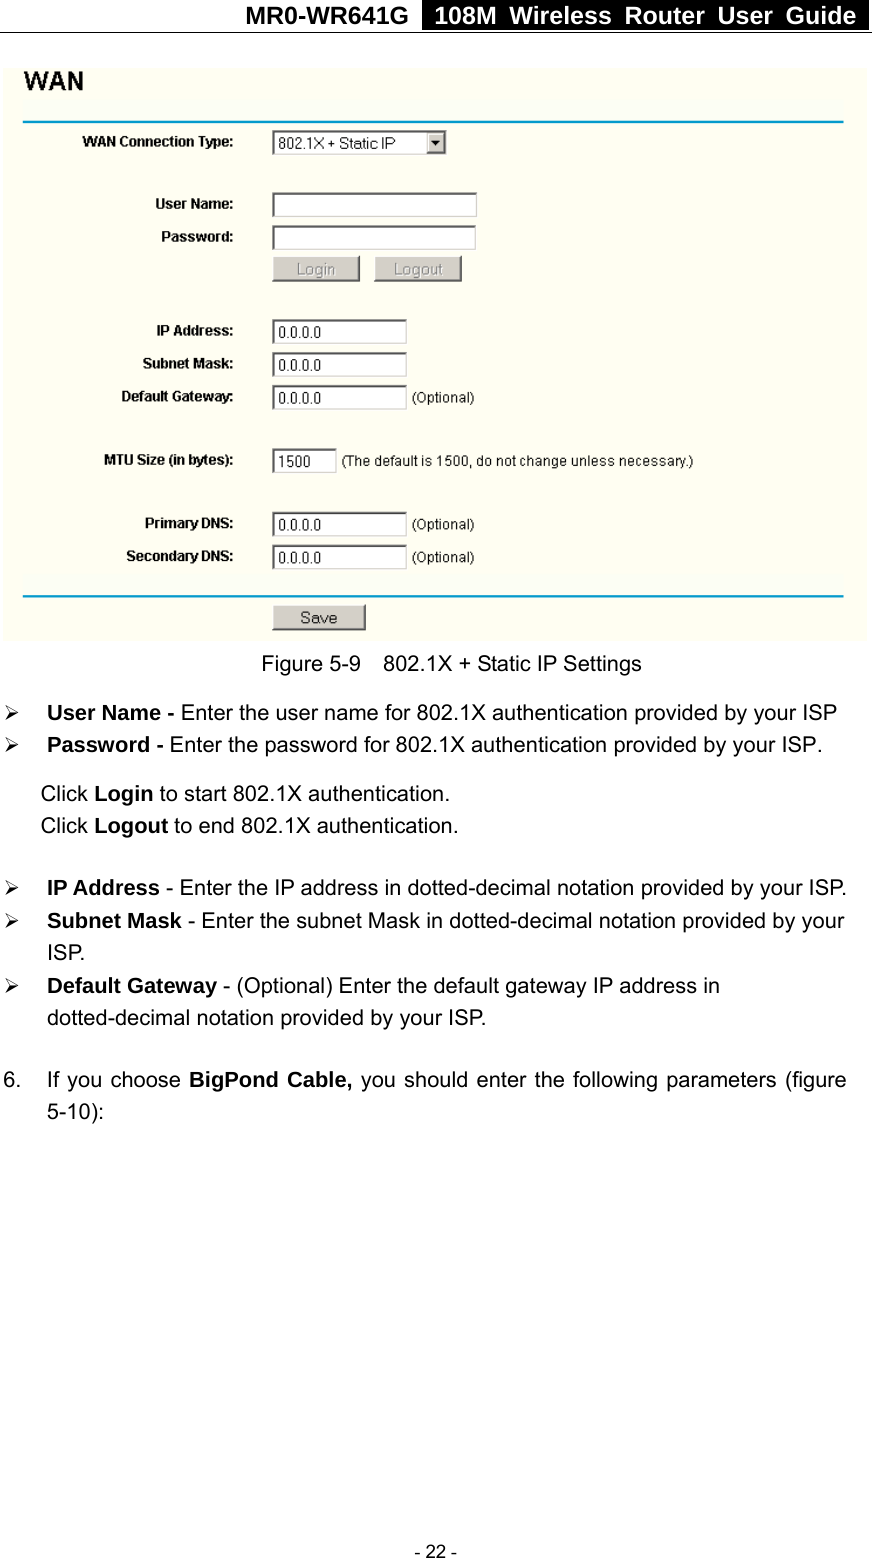 MR0-WR641G   108M Wireless Router User Guide   Figure 5-9    802.1X + Static IP Settings ¾ User Name - Enter the user name for 802.1X authentication provided by your ISP ¾ Password - Enter the password for 802.1X authentication provided by your ISP. Click Login to start 802.1X authentication. Click Logout to end 802.1X authentication. ¾ IP Address - Enter the IP address in dotted-decimal notation provided by your ISP. ¾ Subnet Mask - Enter the subnet Mask in dotted-decimal notation provided by your ISP. ¾ Default Gateway - (Optional) Enter the default gateway IP address in dotted-decimal notation provided by your ISP. 6.  If you choose BigPond Cable, you should enter the following parameters (figure 5-10):    - 22 - 